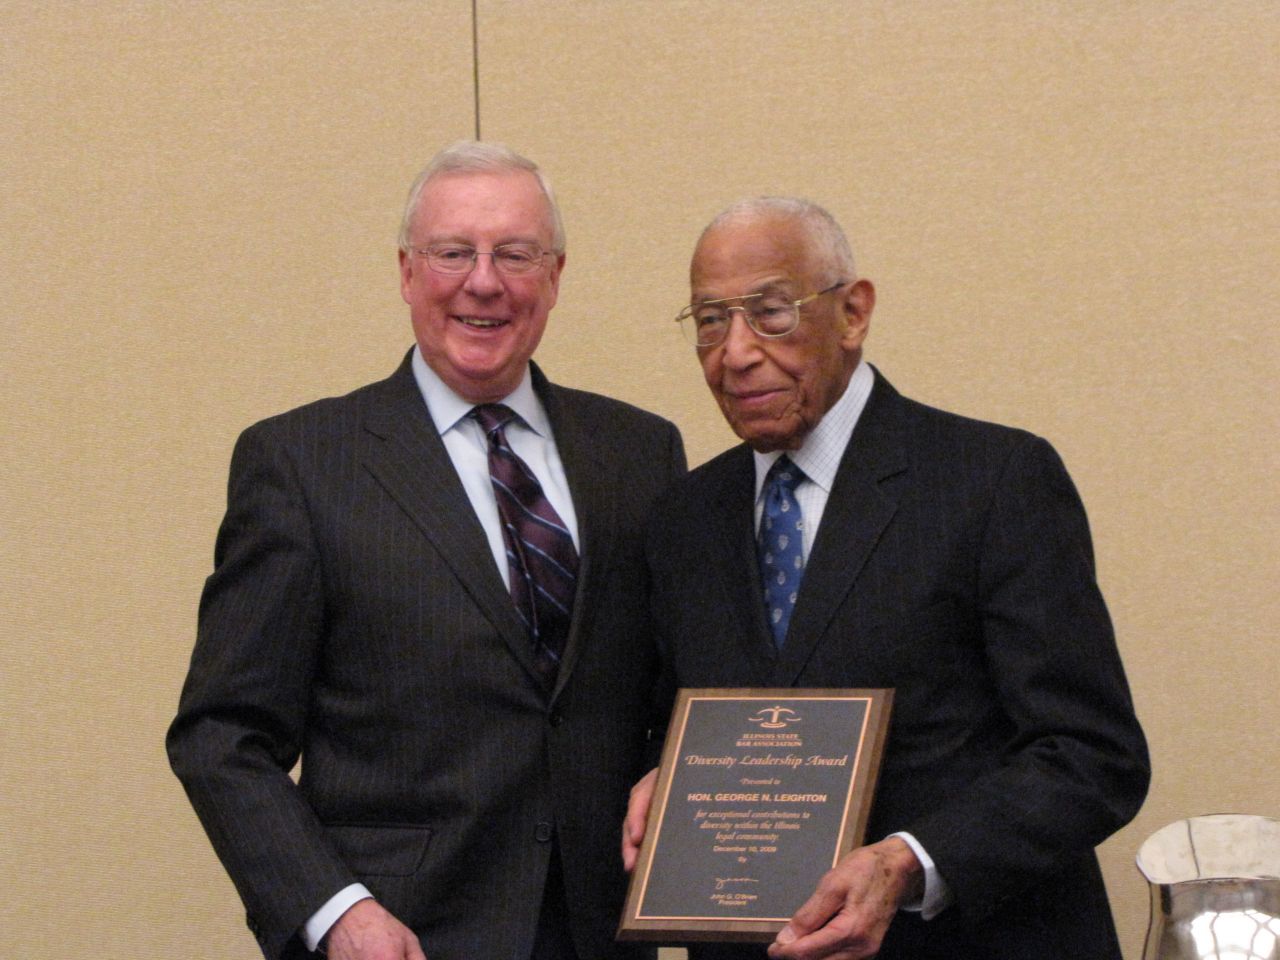 President O'Brien presents Judge Leighton with the ISBA's first Diversity Leadership Award